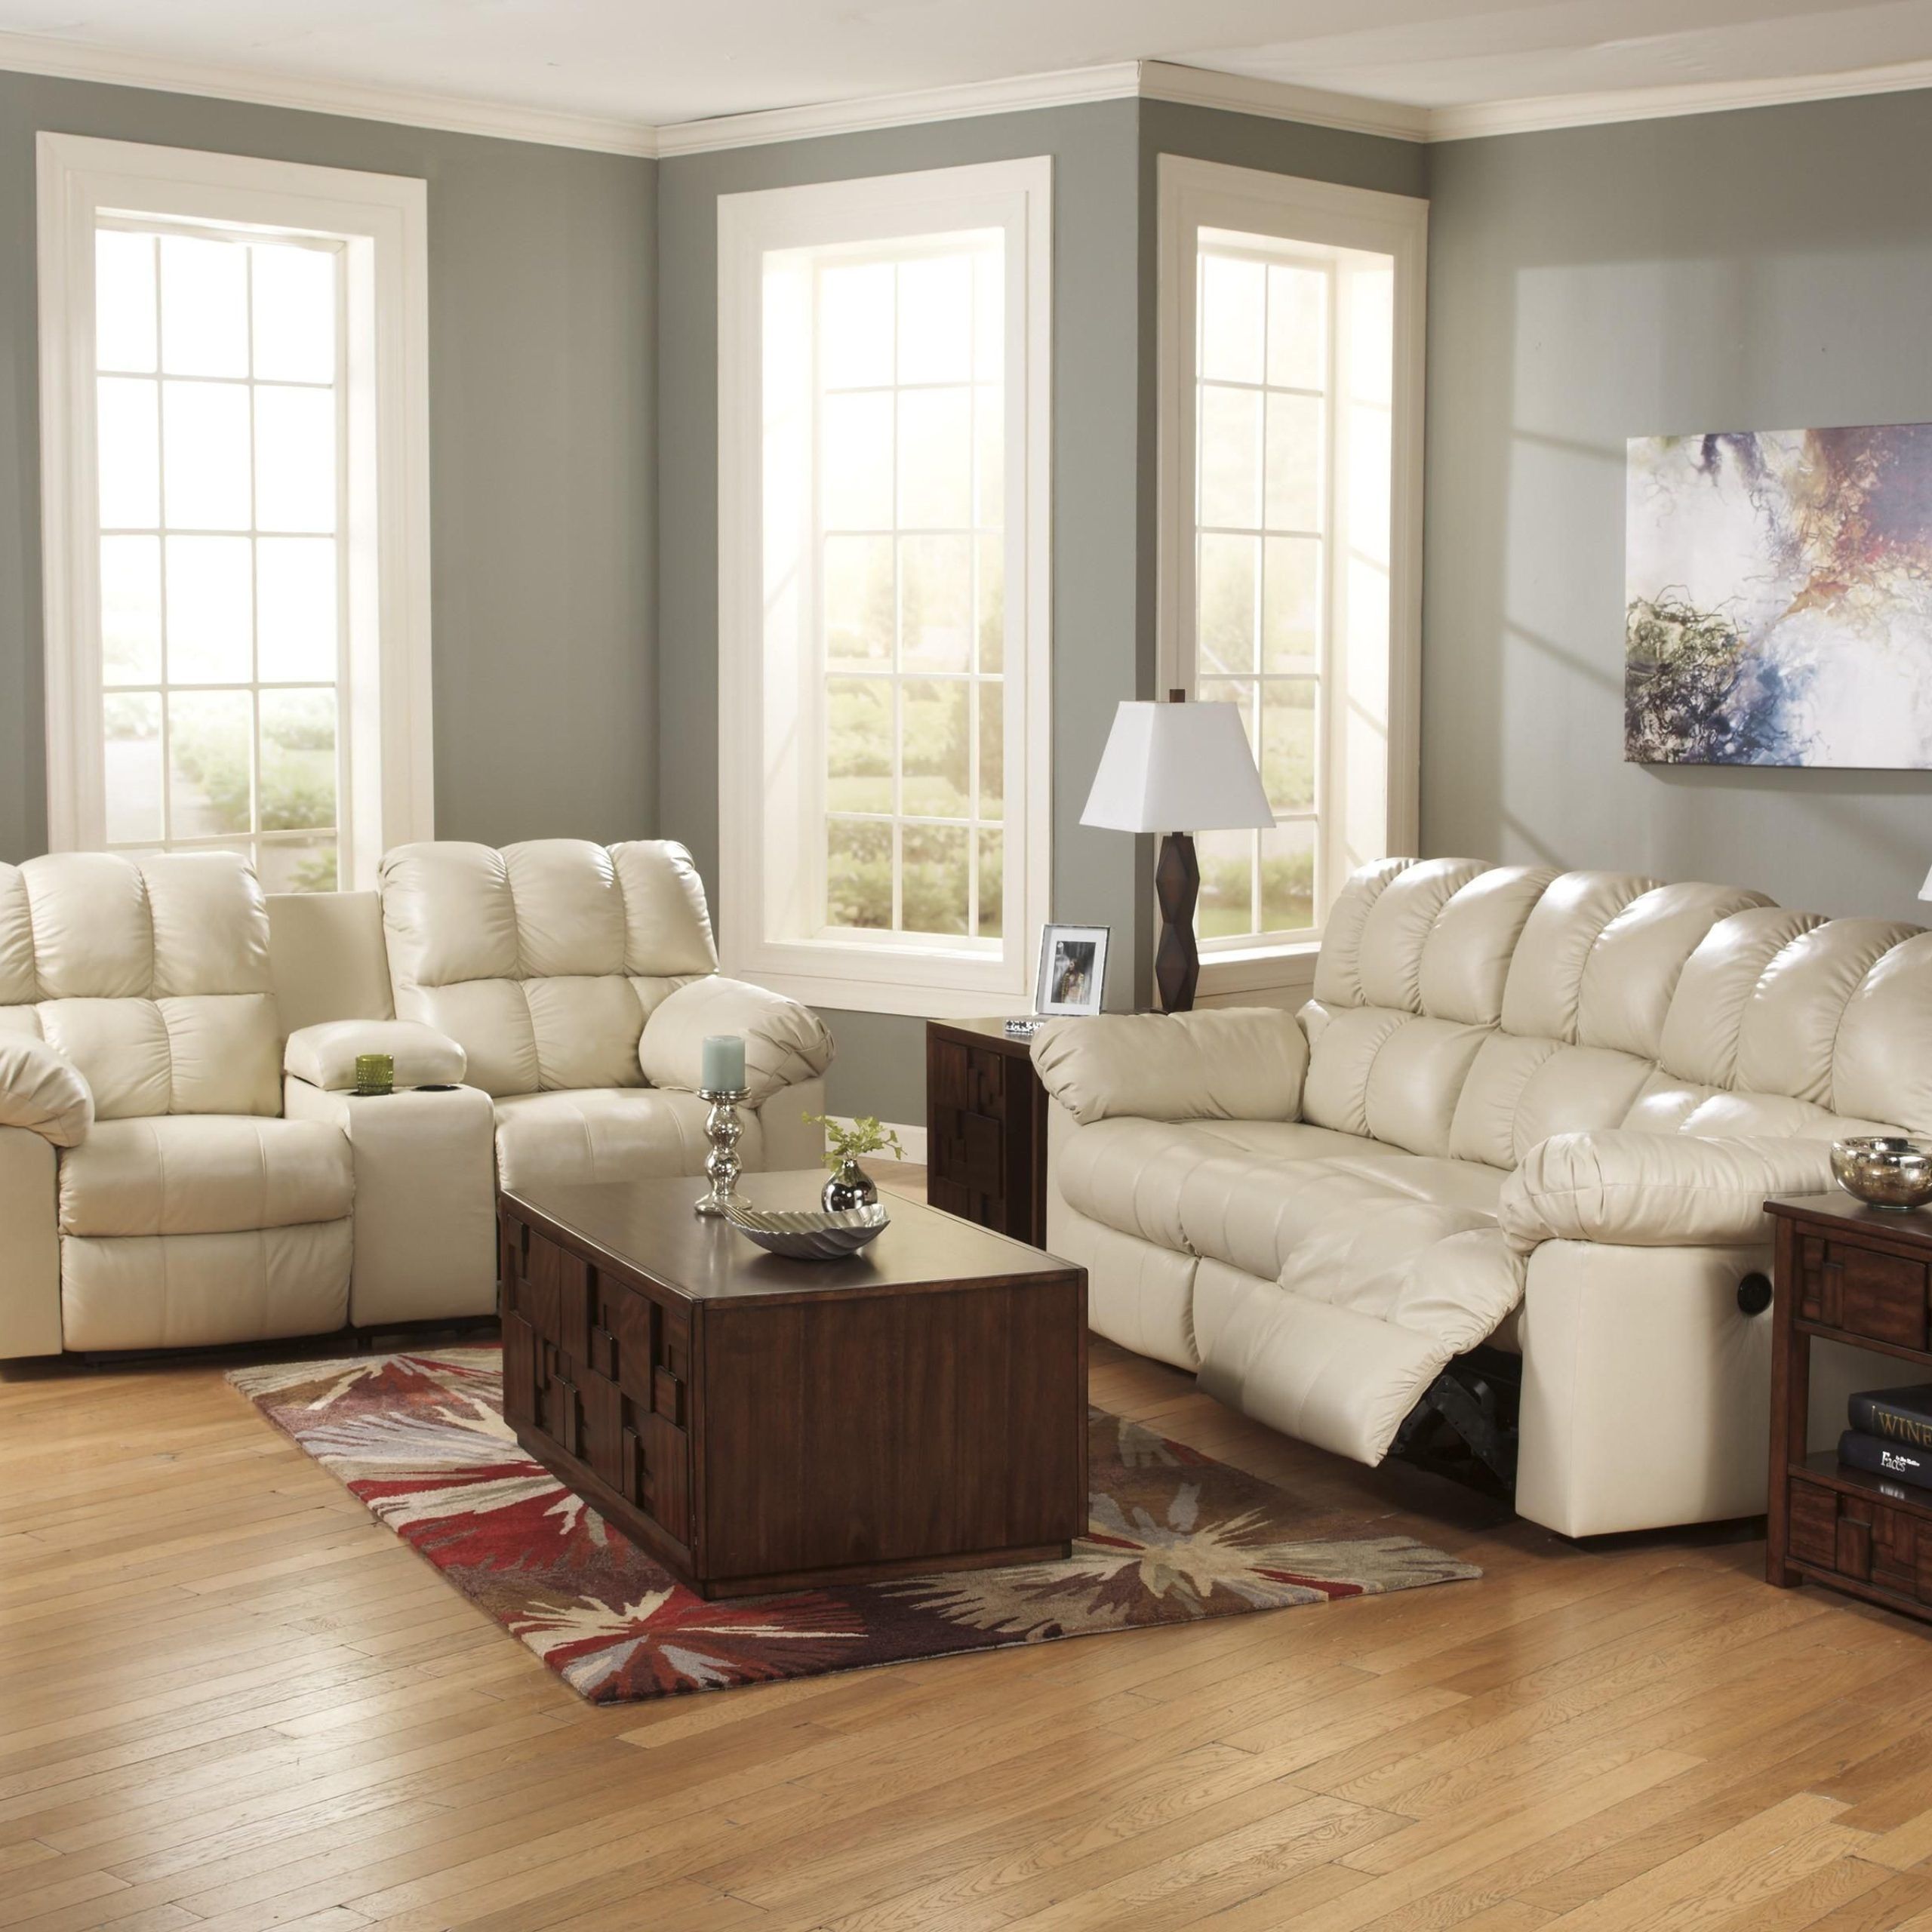 20 Inspirations Cream Colored Sofas | Sofa Ideas Within Sofas In Cream (Gallery 2 of 20)